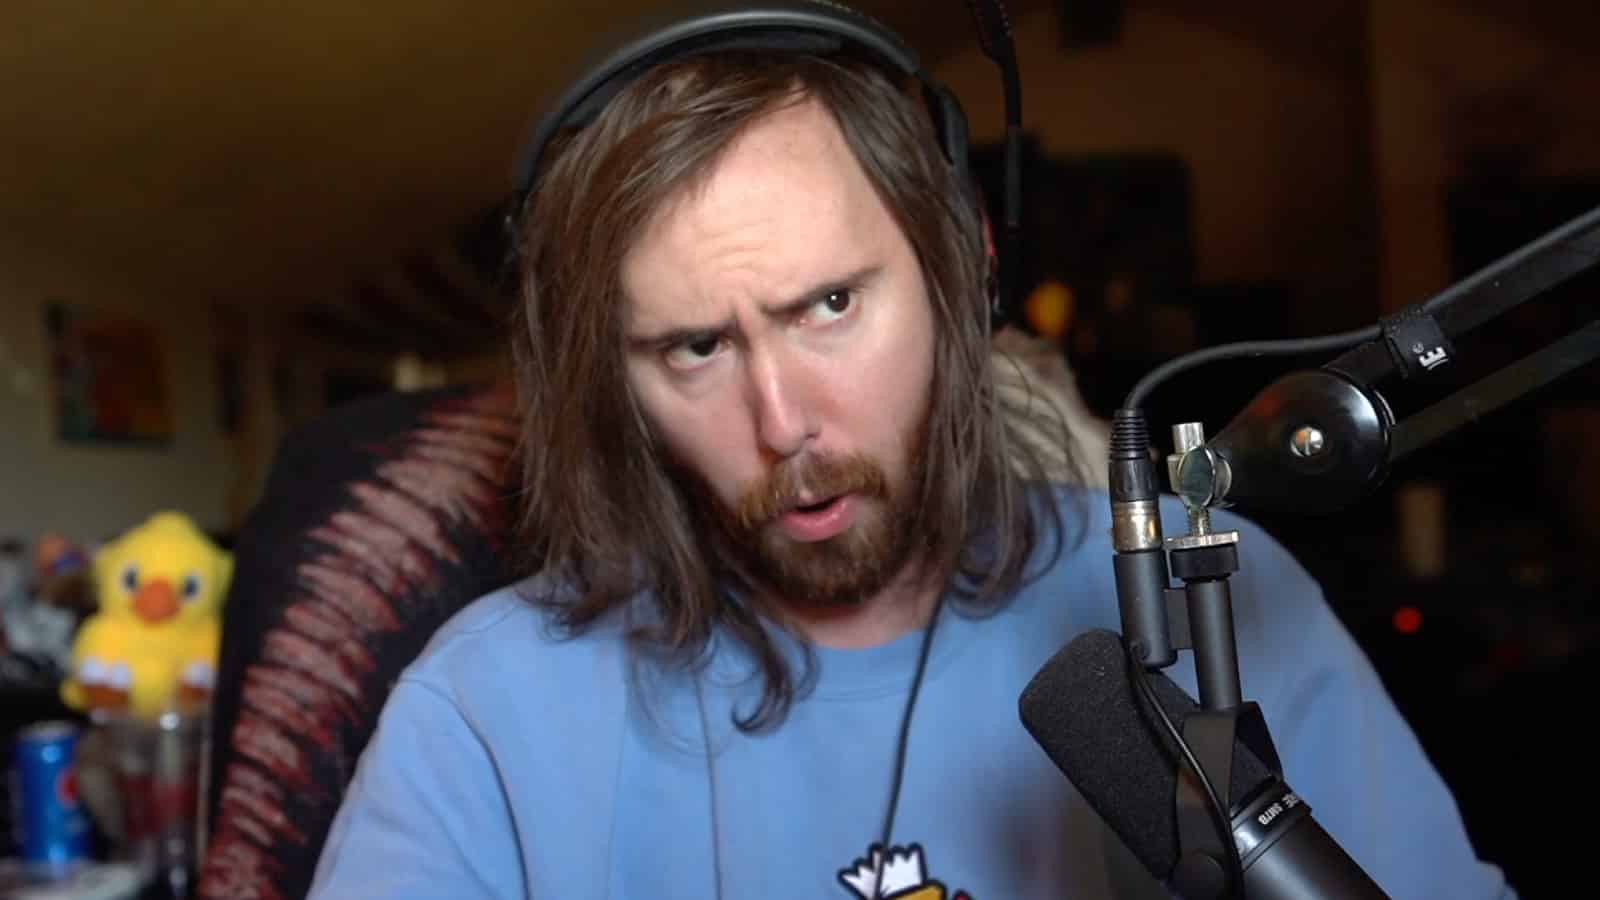 Asmongold streaming on Twitch